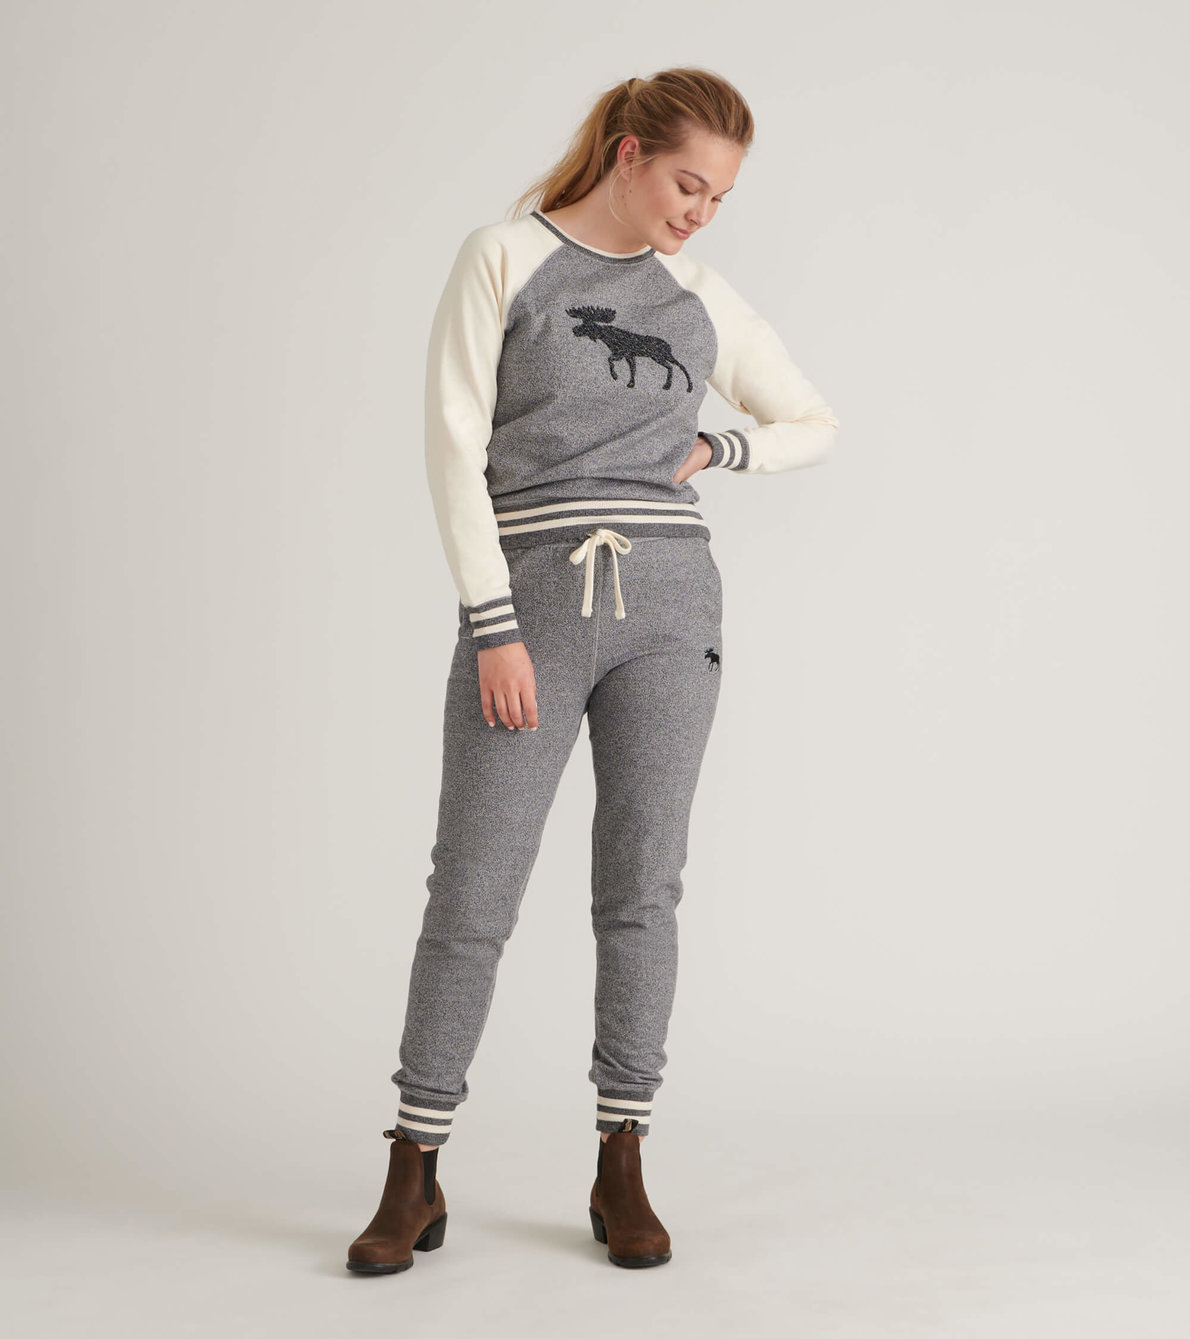 View larger image of Marled Grey Moose Women's Heritage Slim Fit Joggers